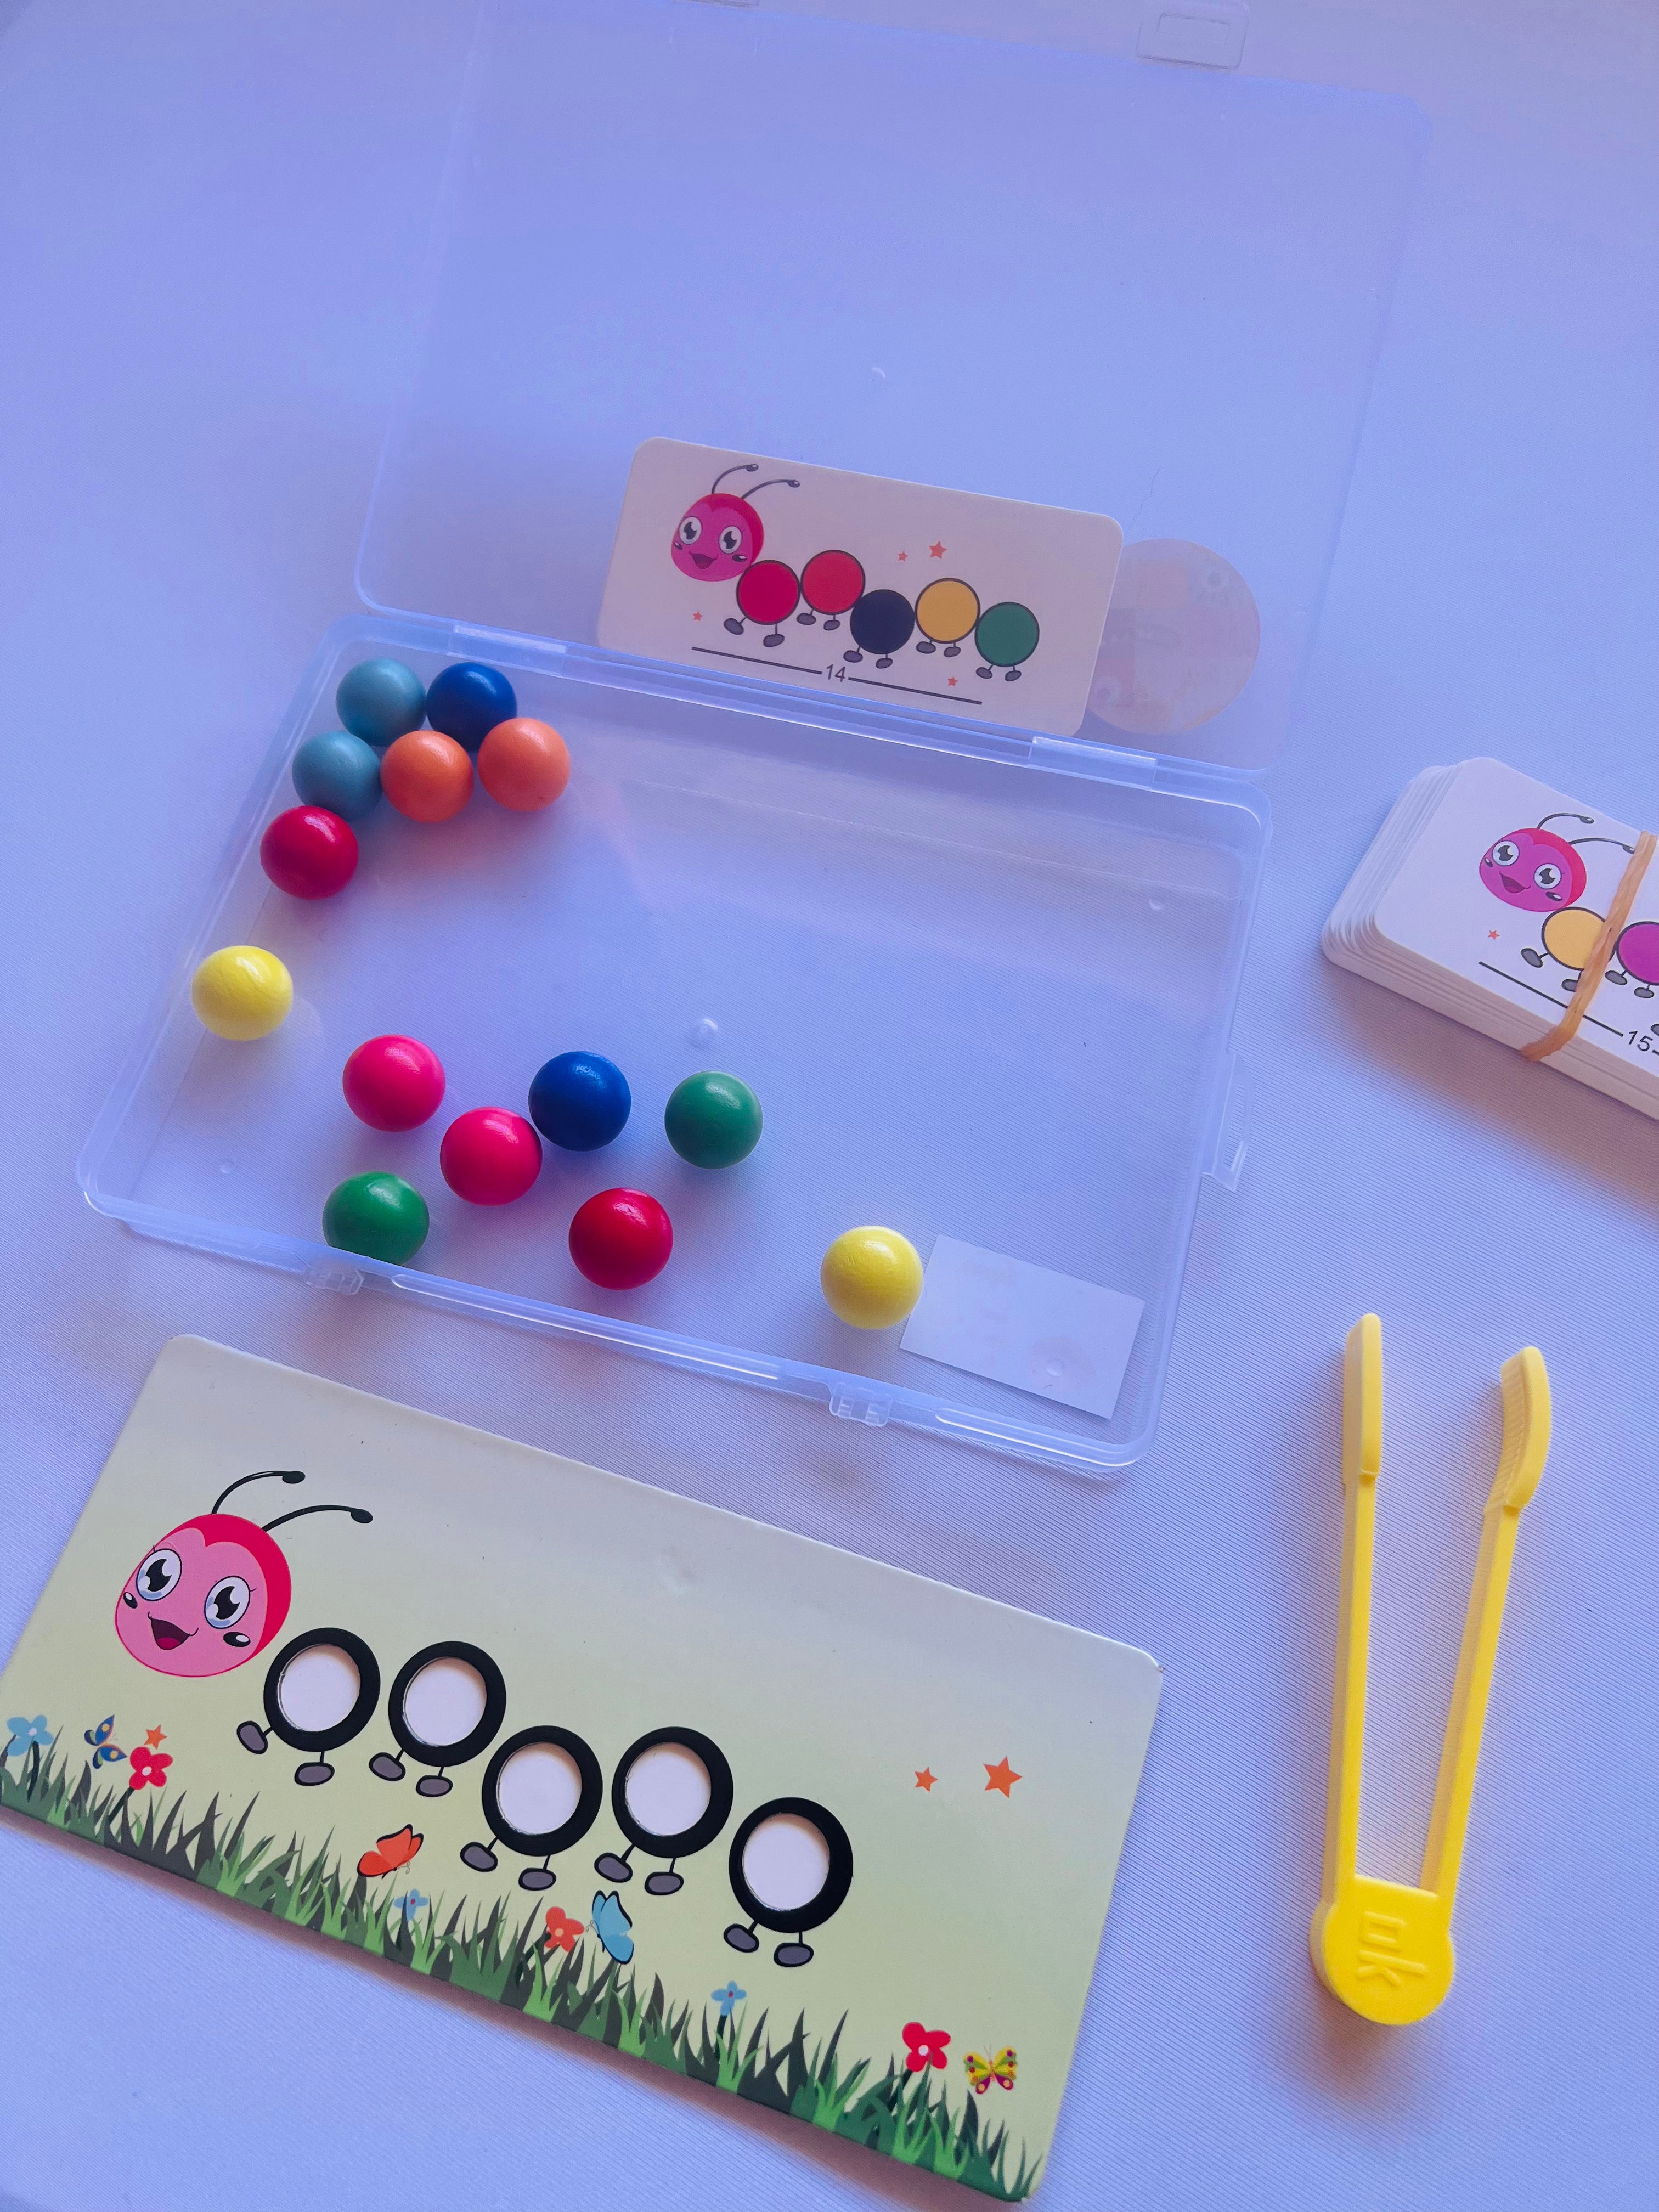 Caterpillar game - Creative mindz - busy bags for busy kids 